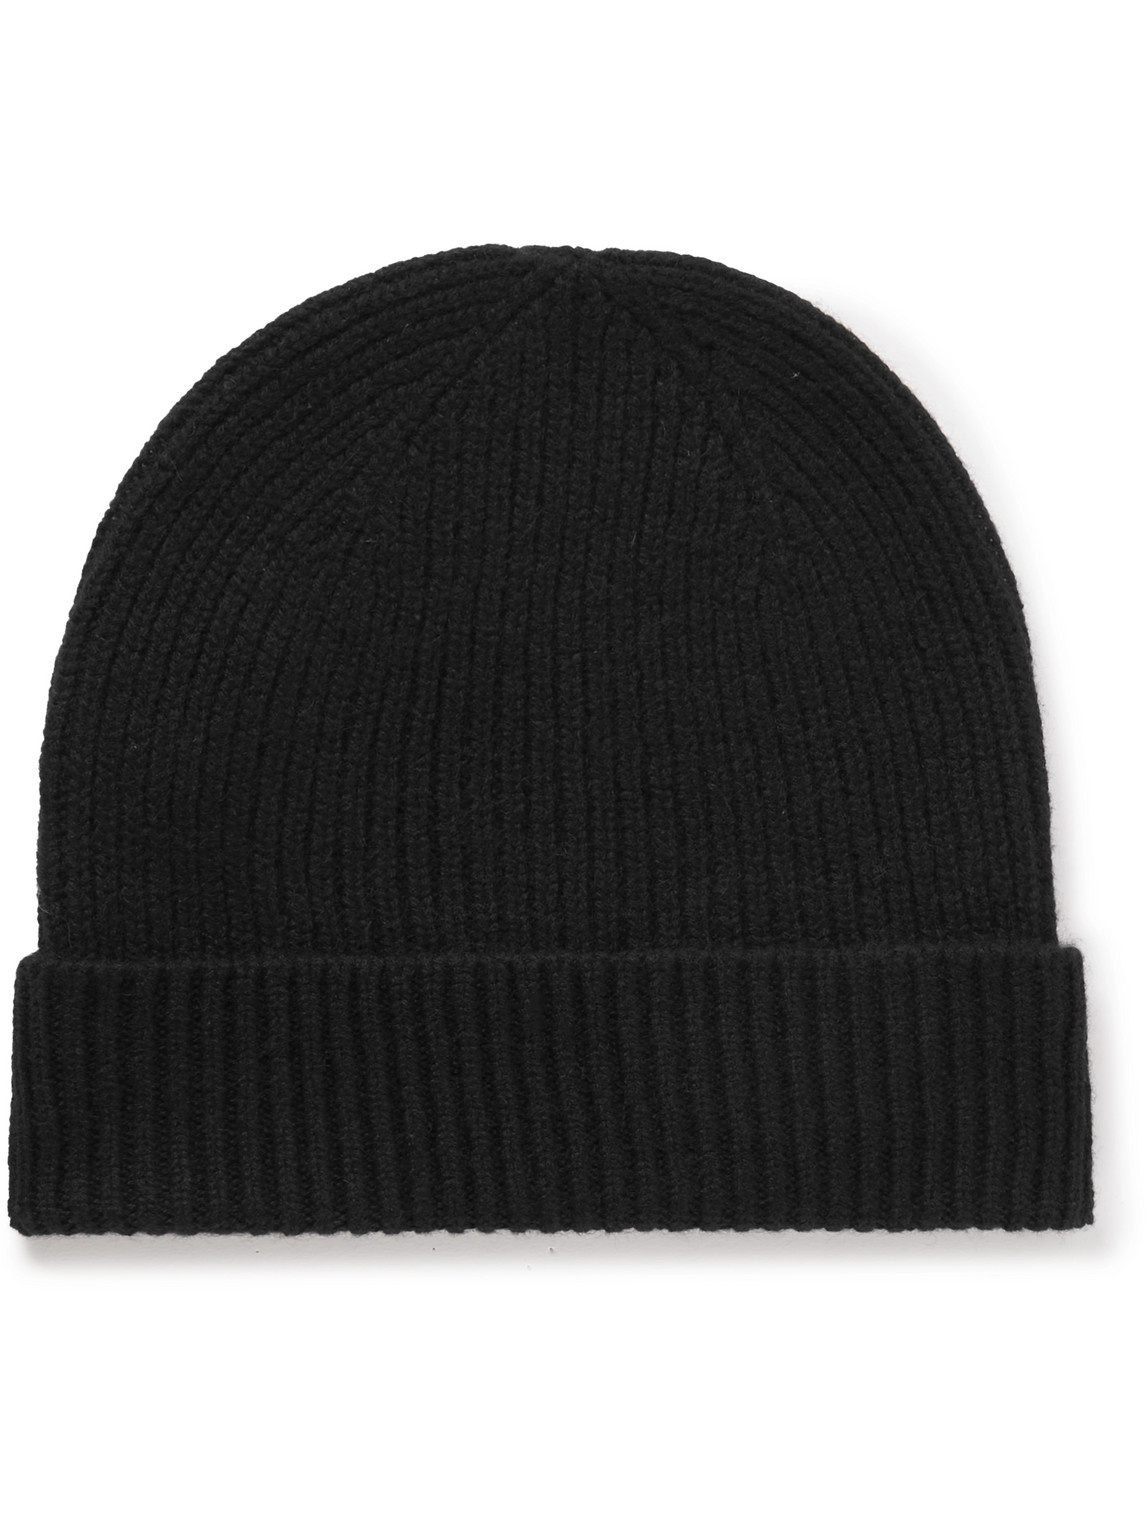 Anderson & Sheppard Ribbed Cashmere Beanie In Black